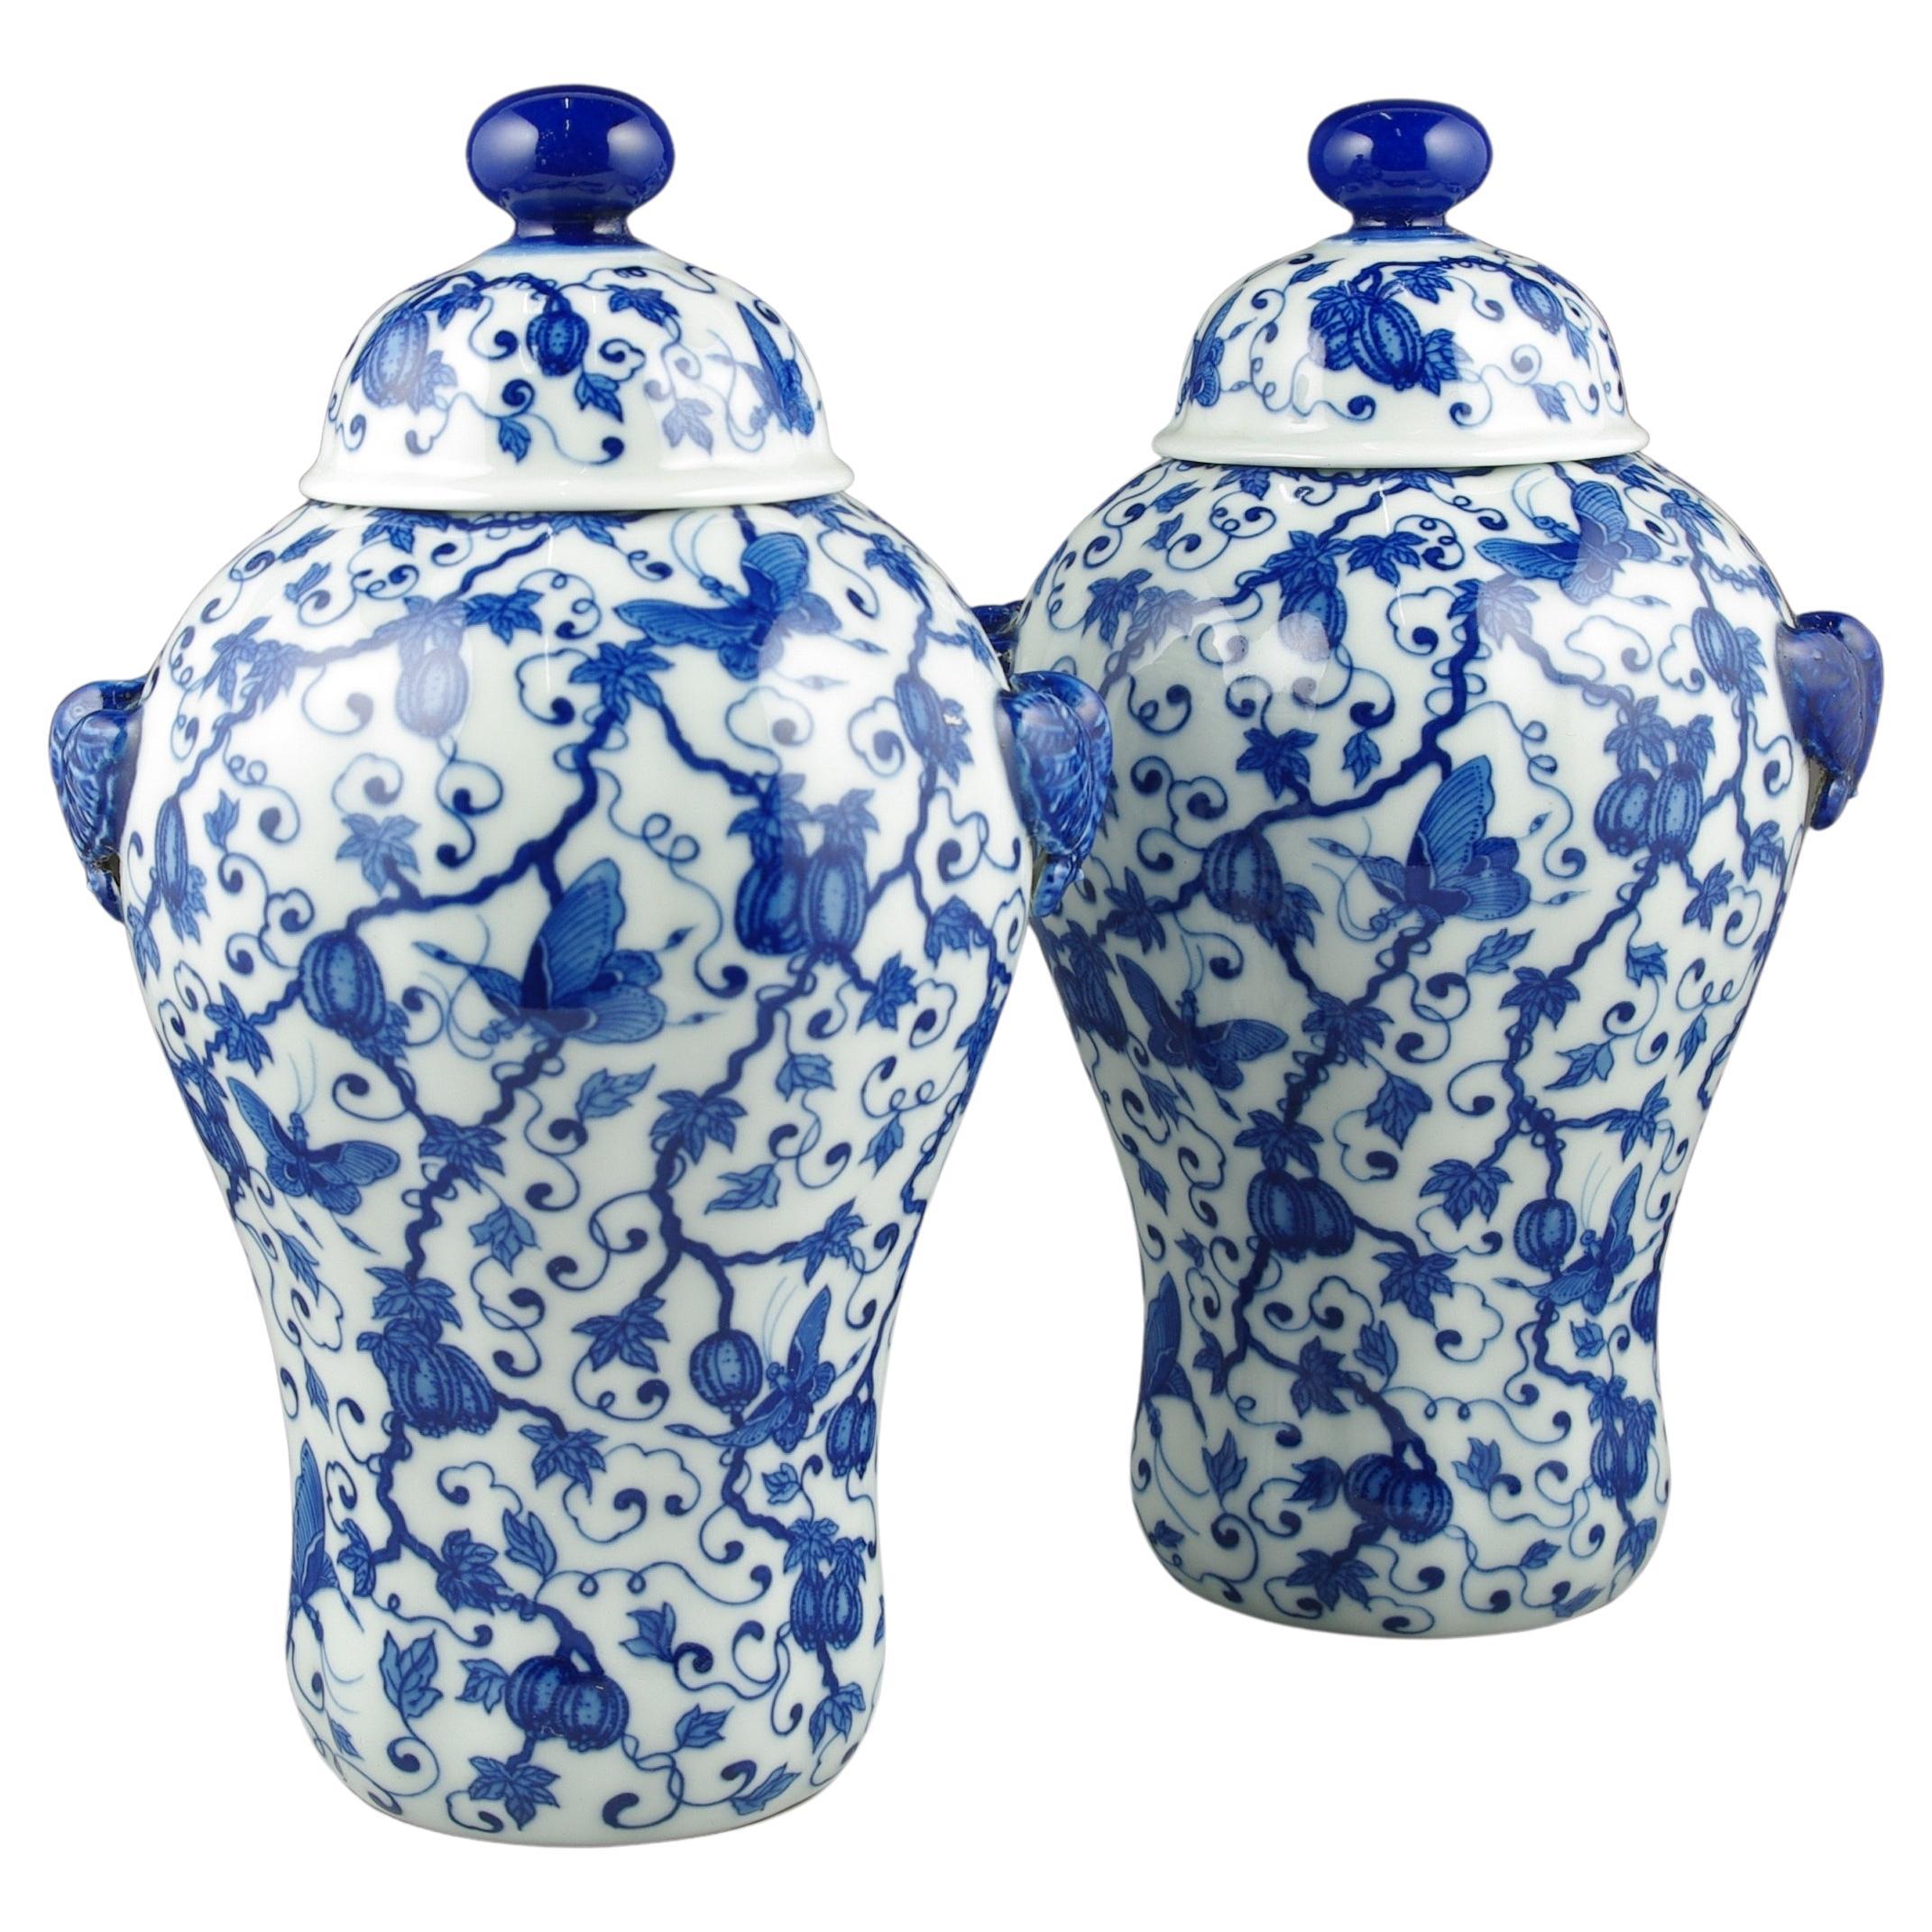 An exquisite pair of early 20th-century blue and white covered lobed baluster vases, a true embodiment of the artistic brilliance that characterizes this period in Chinese porcelain craftsmanship. Each vase, sculpted in a classic baluster form, is a